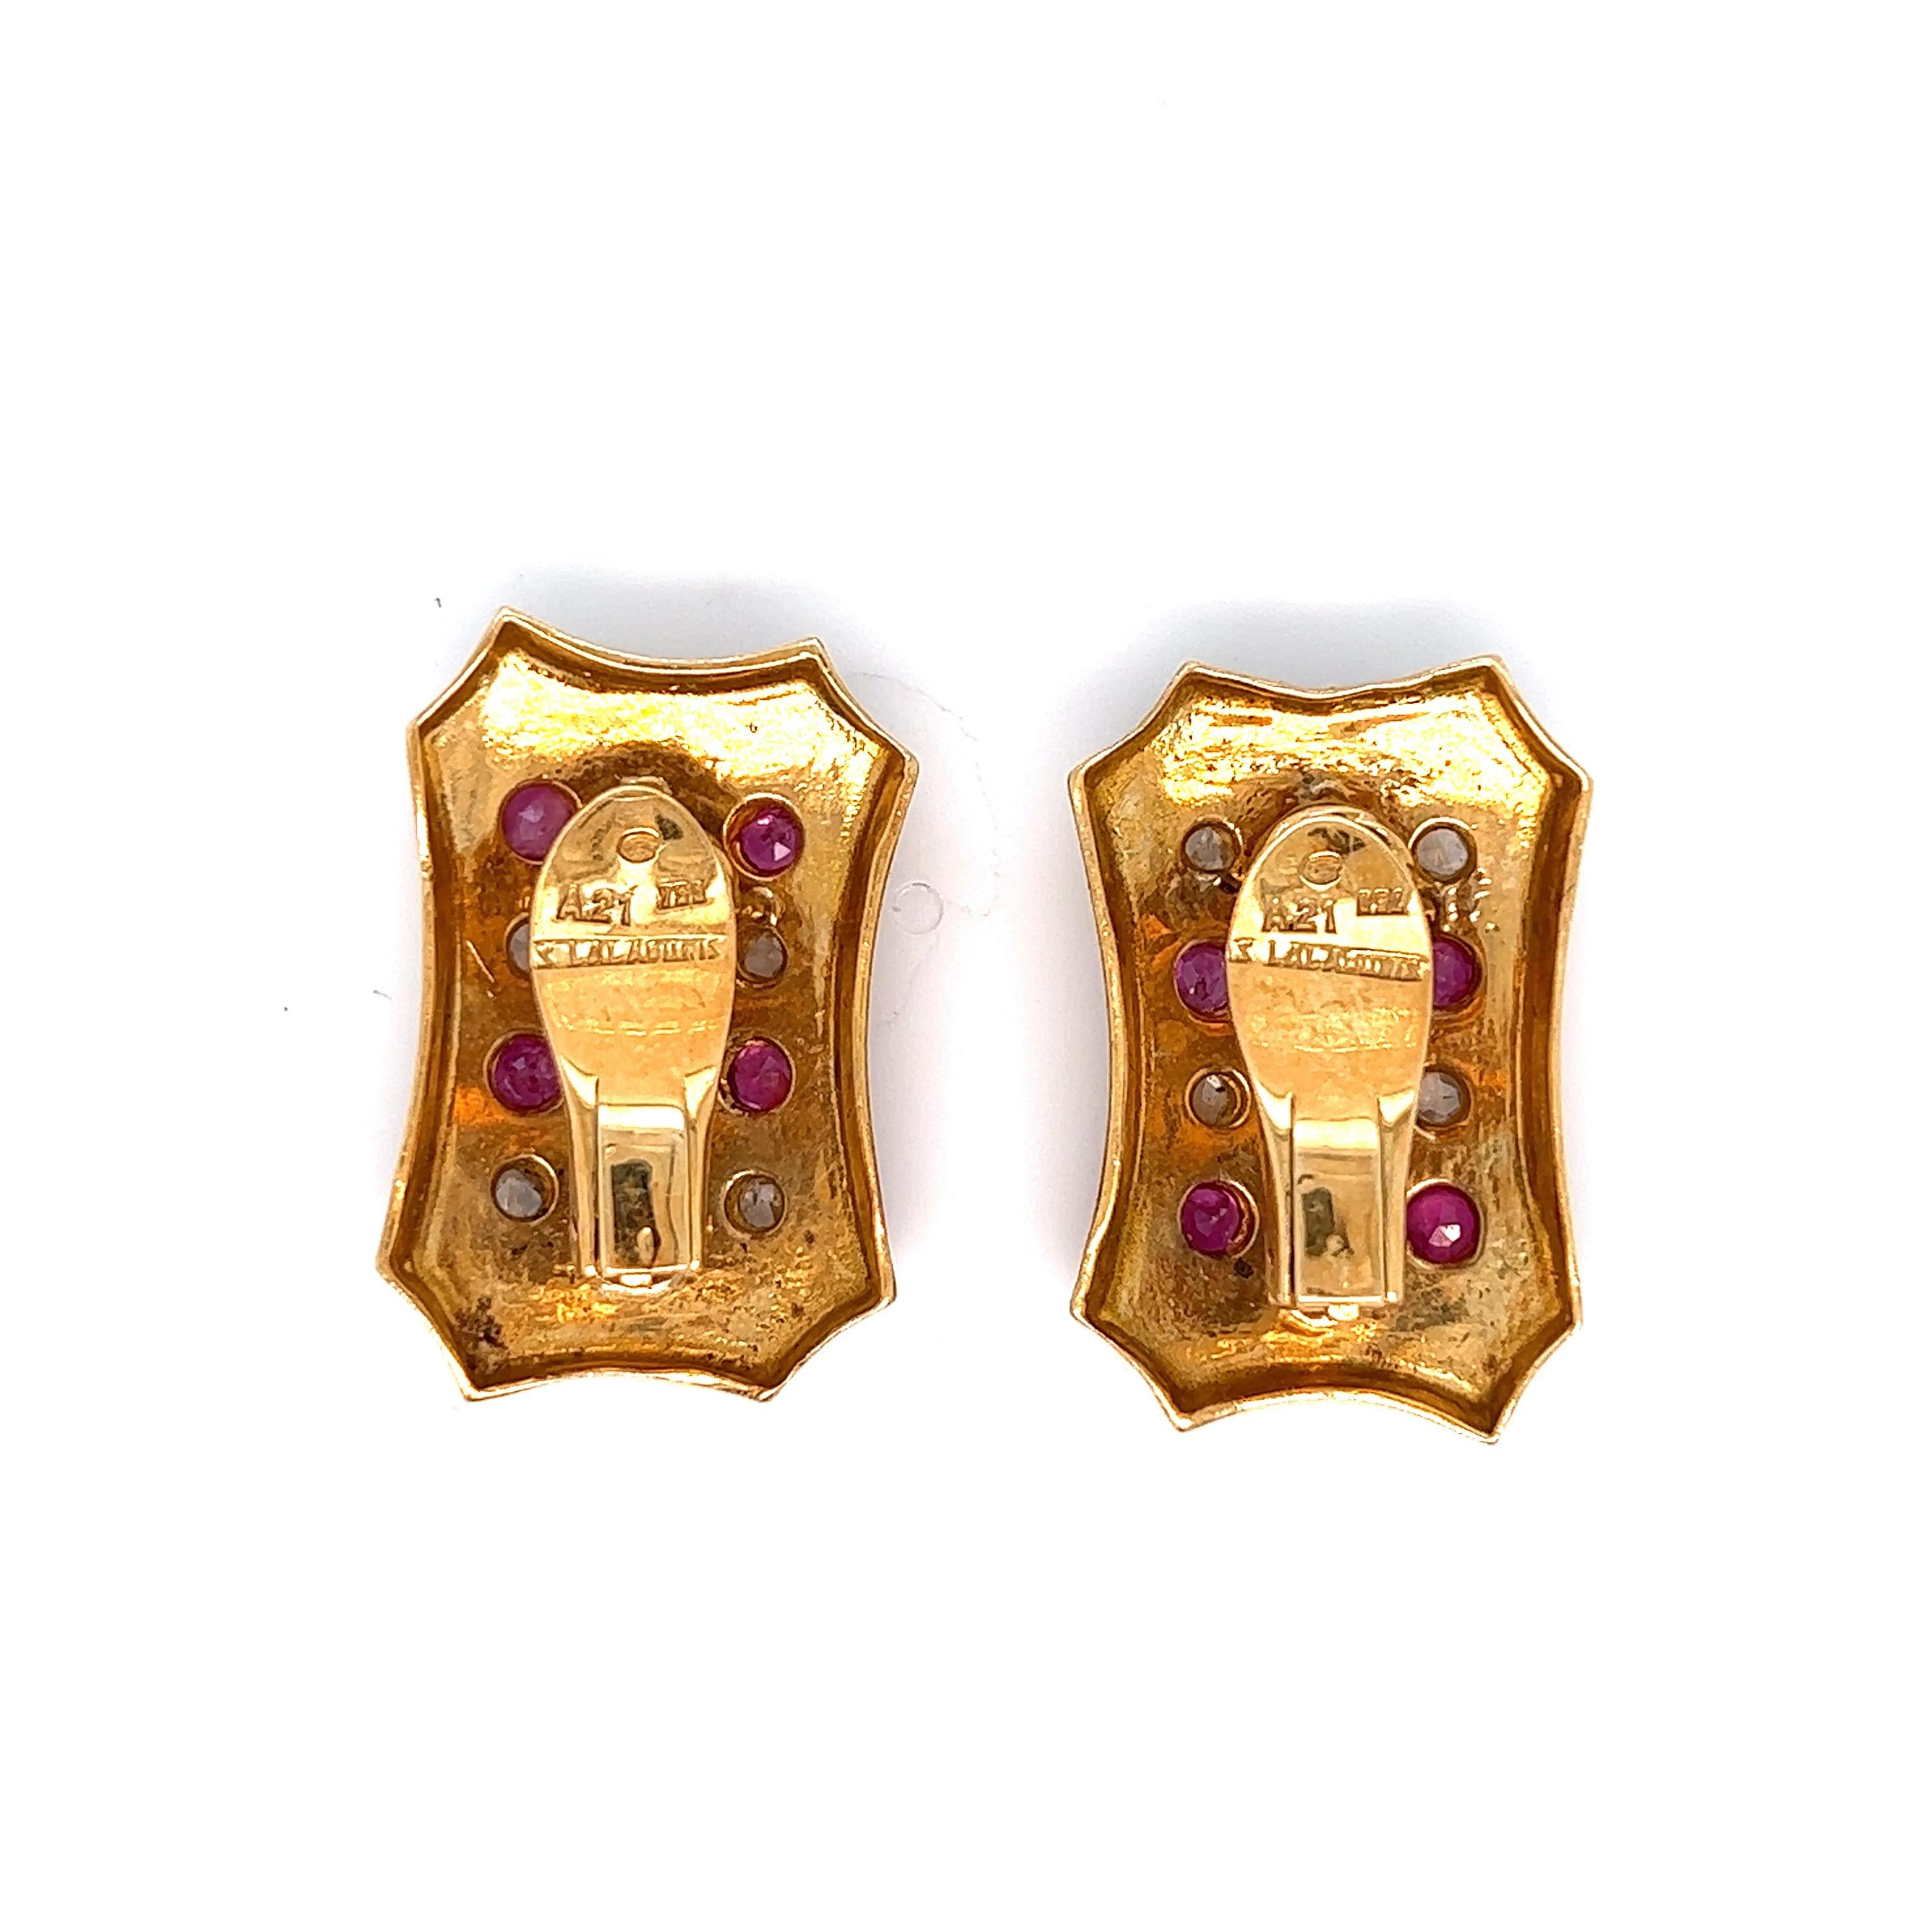 Lalaounis ruby and diamond ear clips, Greek

Round-cut rubies of approximately 1.20 carat, rose-cut diamonds of approximately 0.48 carat, 18 karat yellow gold 

Marked Lalaounis, 750, A.21

Size: width 2 cm, length 3 cm
Total weight: 21.2 grams 